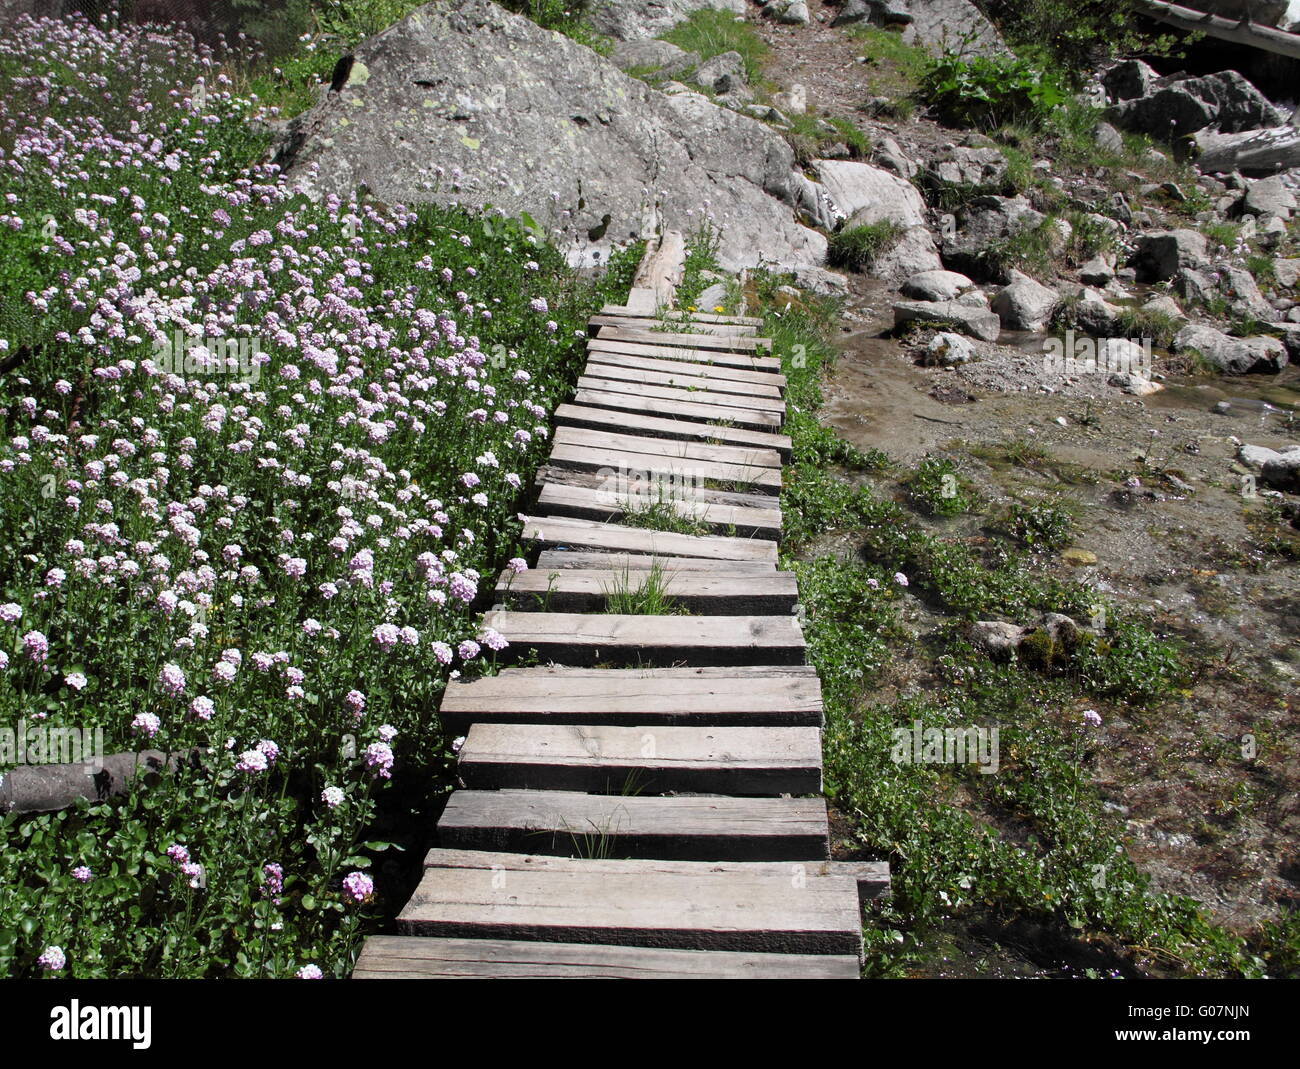 The path of wooden planks near a creek and flowers Stock Photo